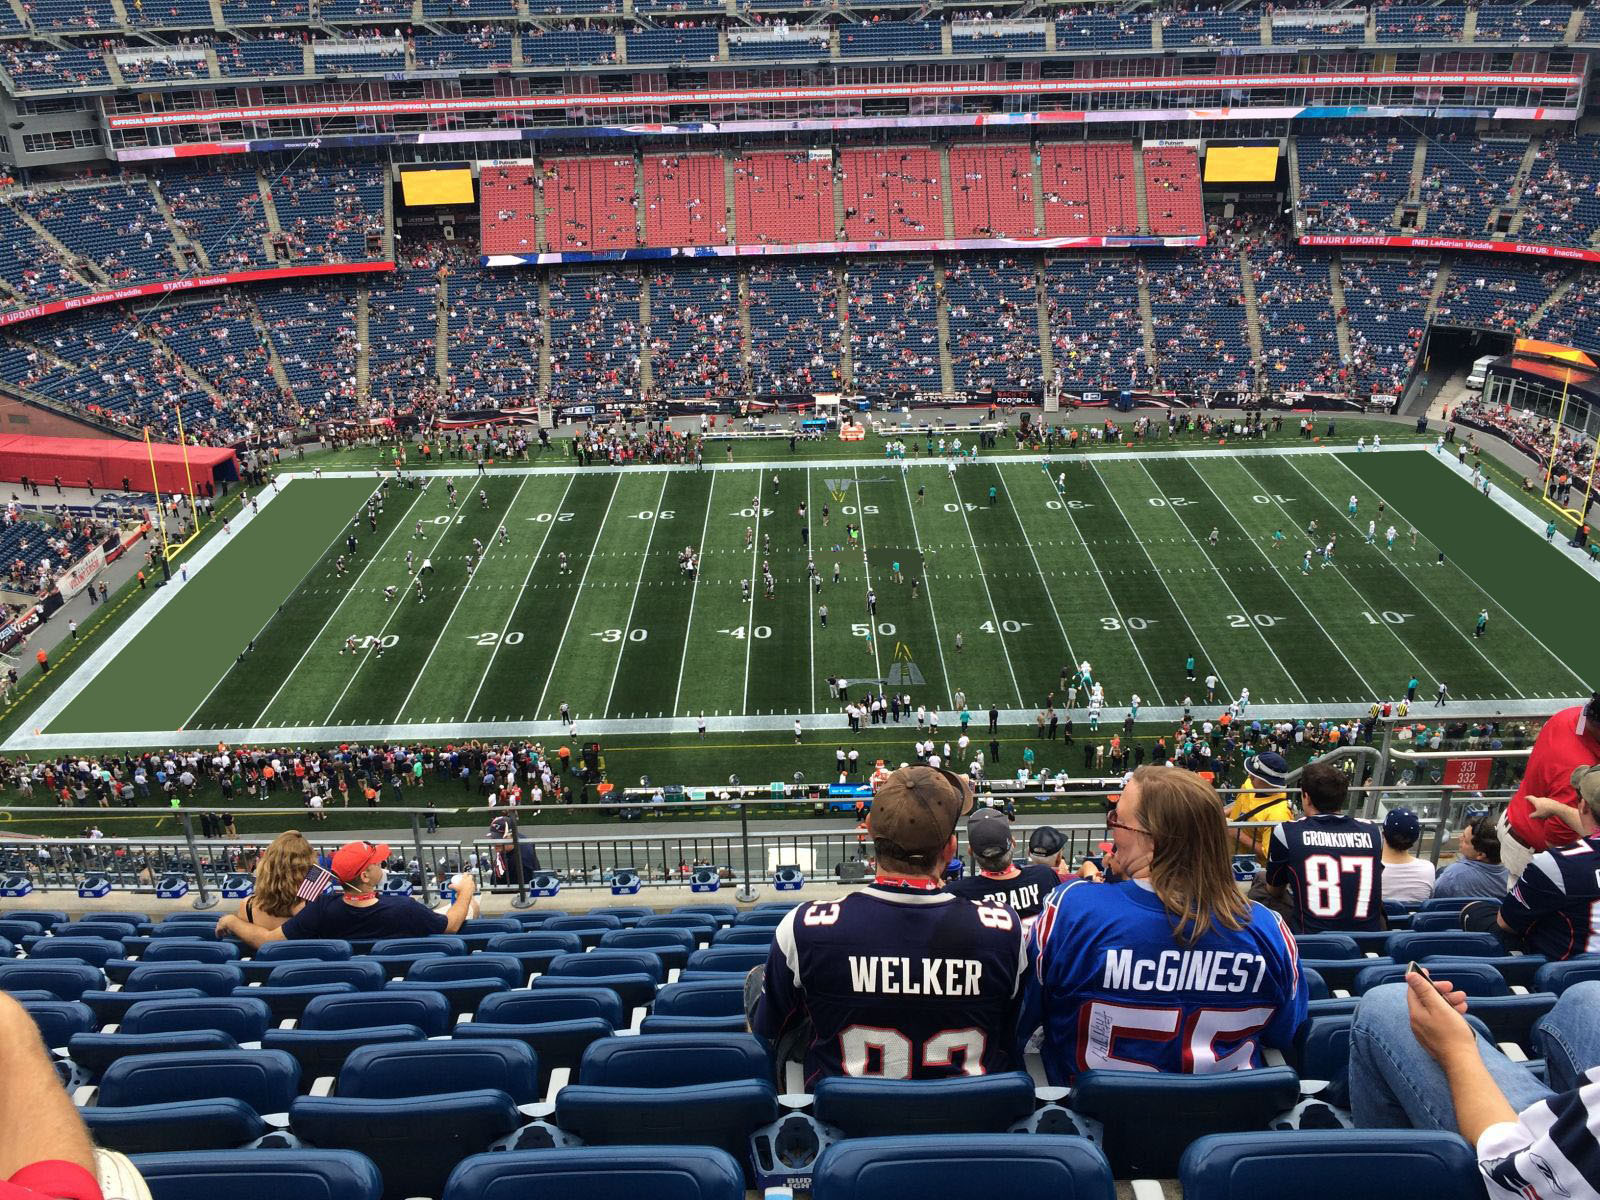 section 332, row 16 seat view  for football - gillette stadium